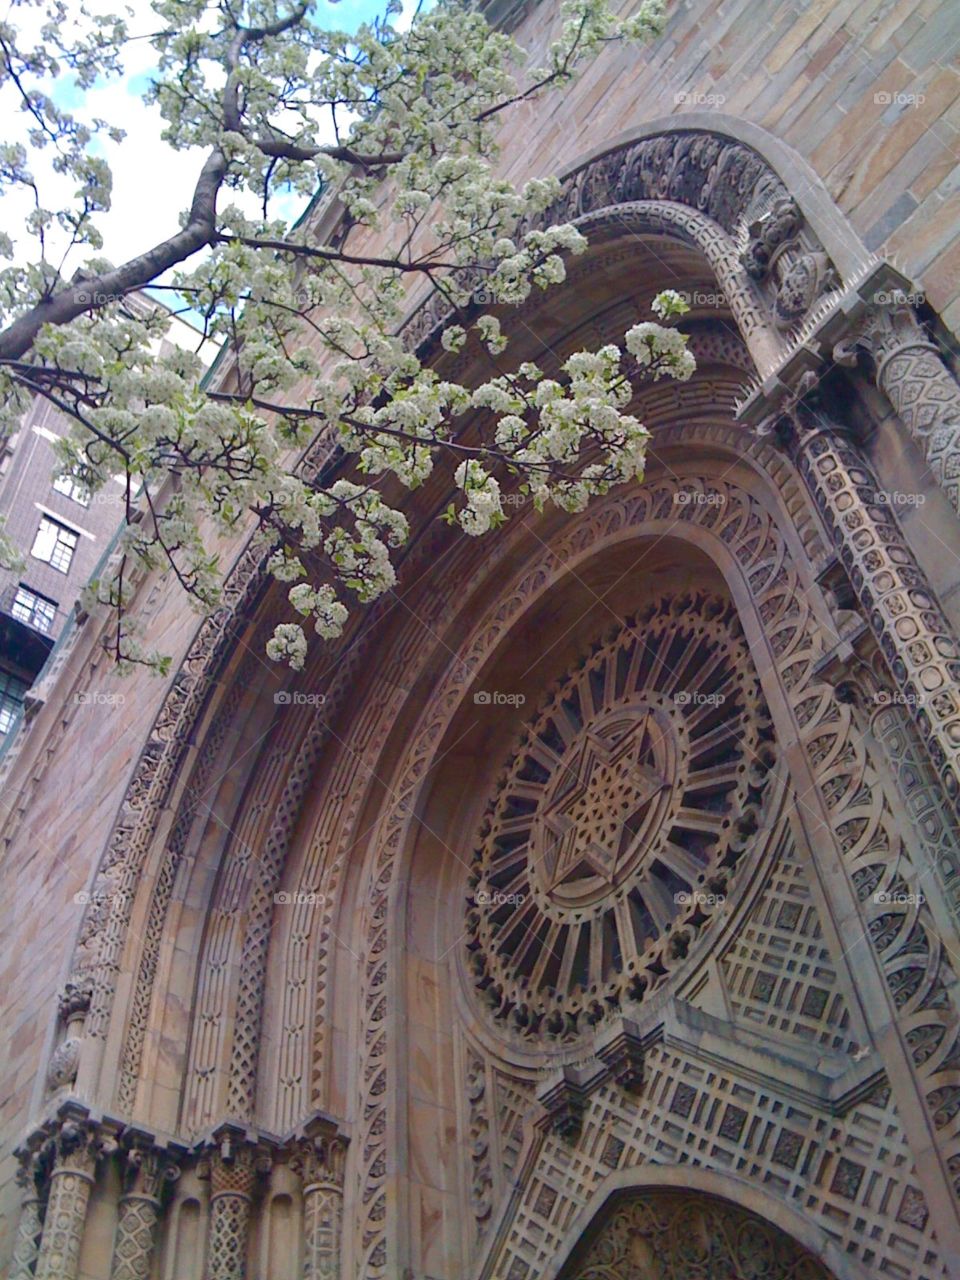 Blossoms and architecture on the UWS